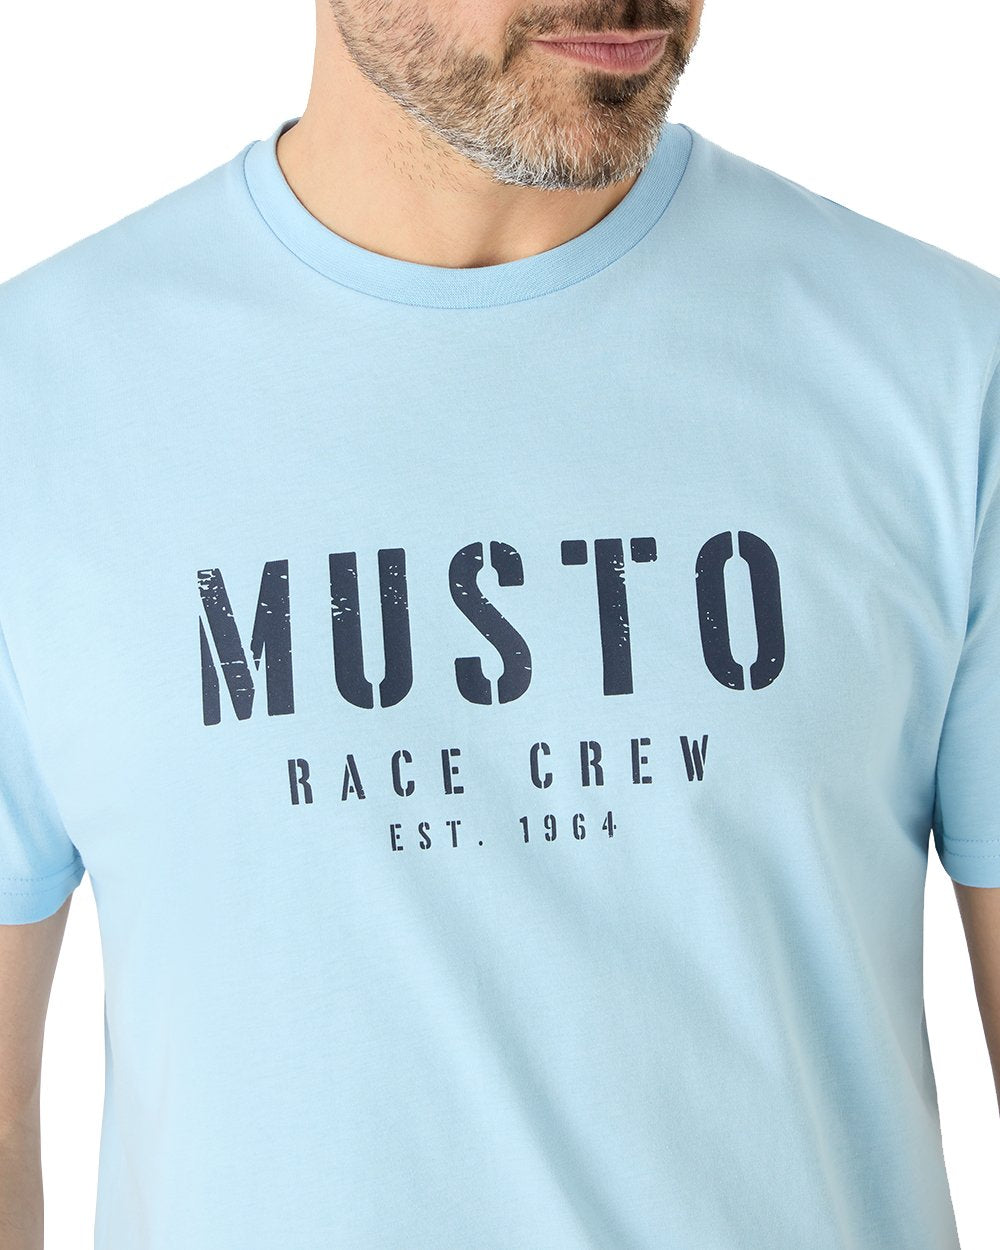 Clear Sky Coloured Musto Mens Classic Short Sleeve T-Shirt On A White Background 